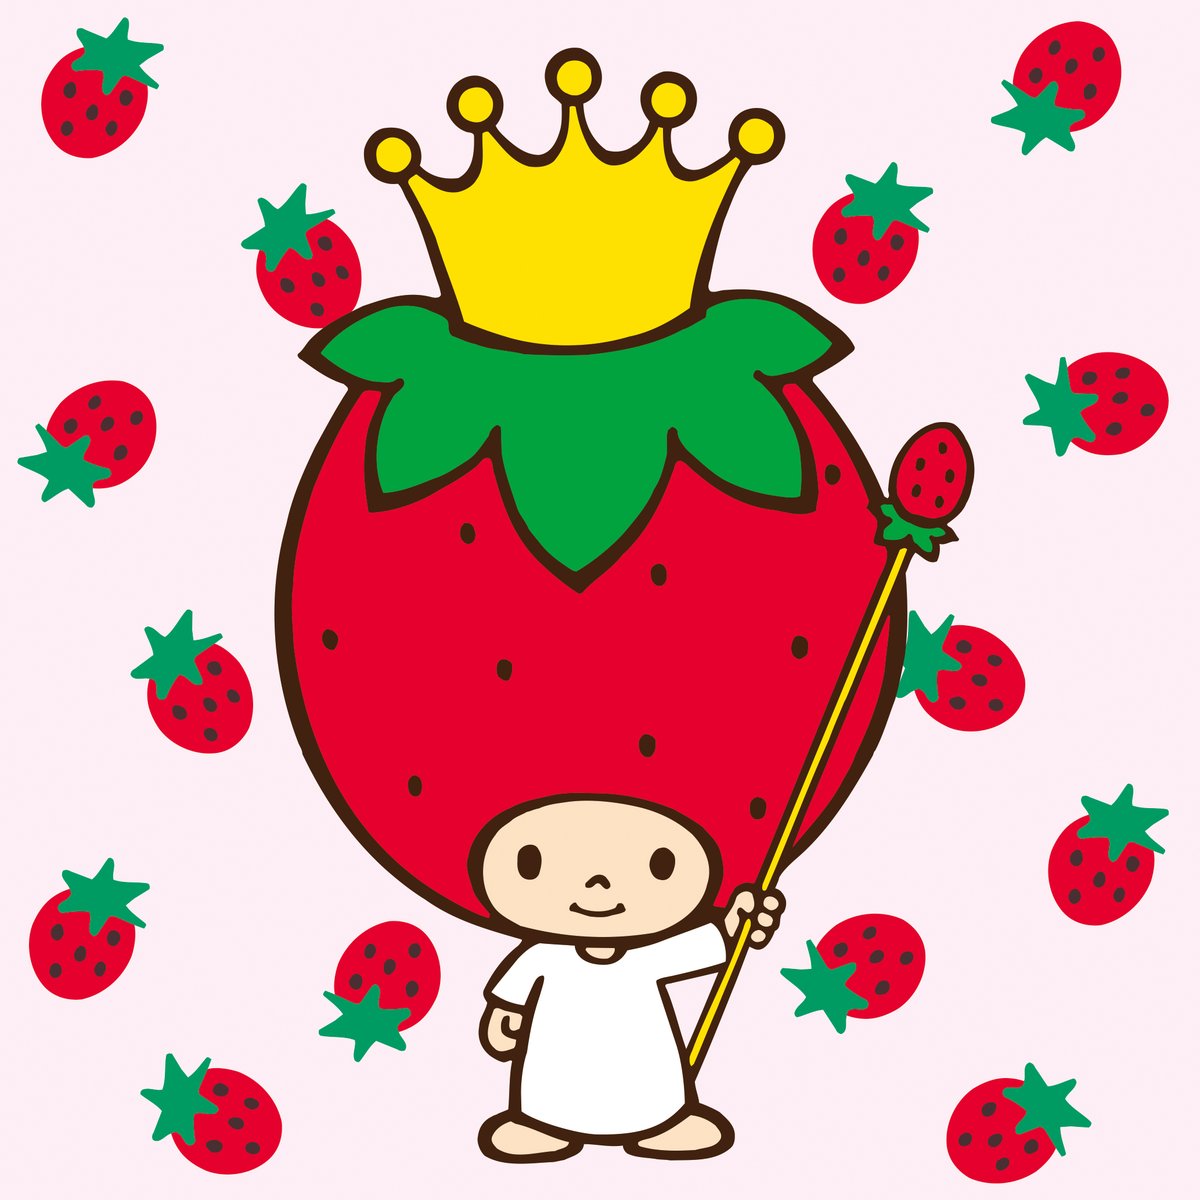 This was a transformative moment for Japanese pop culture. Over next decade, Tsuji turned his company into the nation’s top purveyor of things fancy & cute. In 1973 he renamed it Sanrio. Sanrio's PR newsletter is “Strawberry News,” and editor Tsuji is “Strawberry King.” (8/x